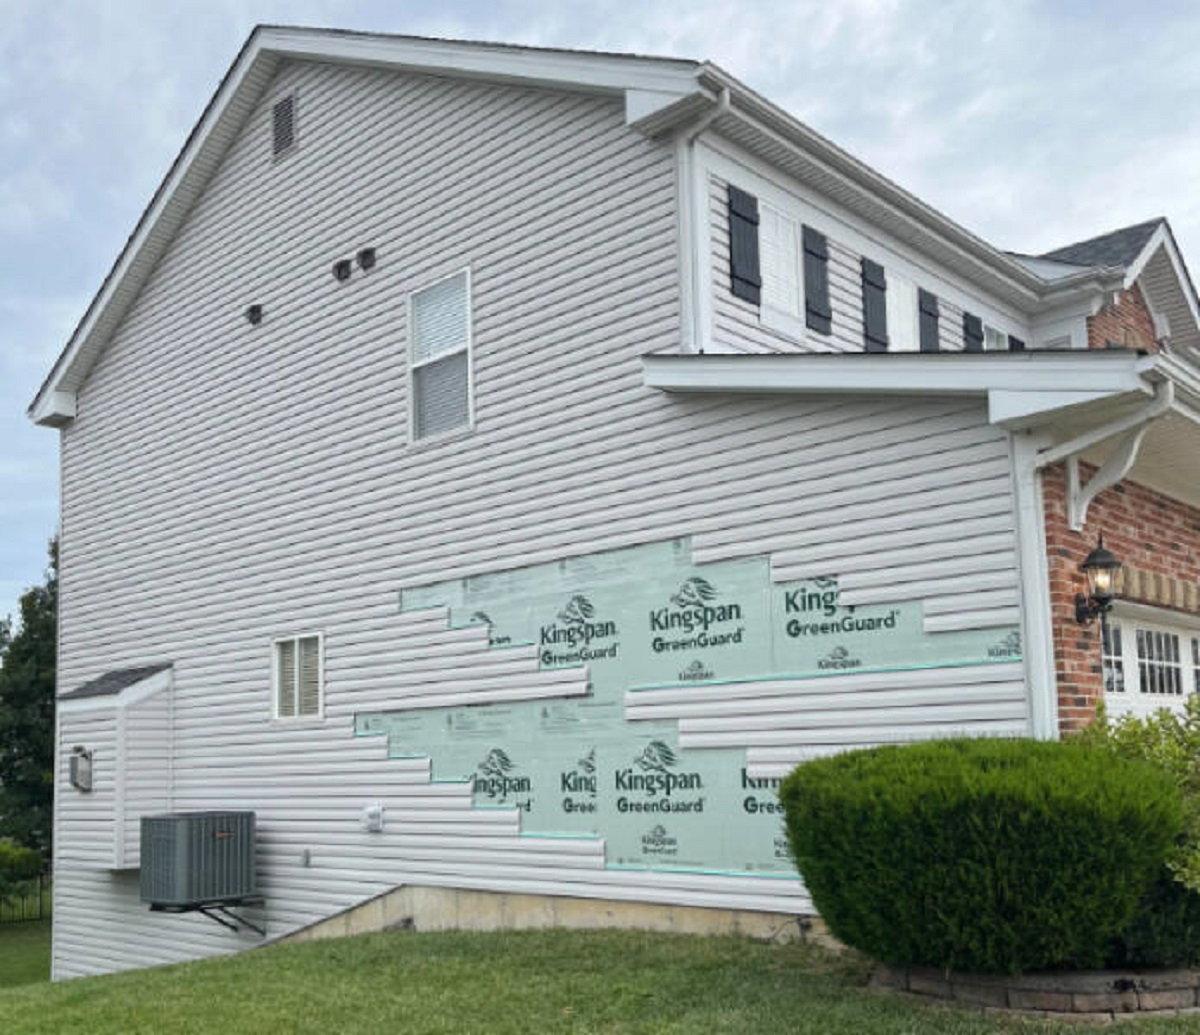 “Siding crew ran out of siding and stole some from the completed side on a street corner. Won’t get a new shipment until next week…”